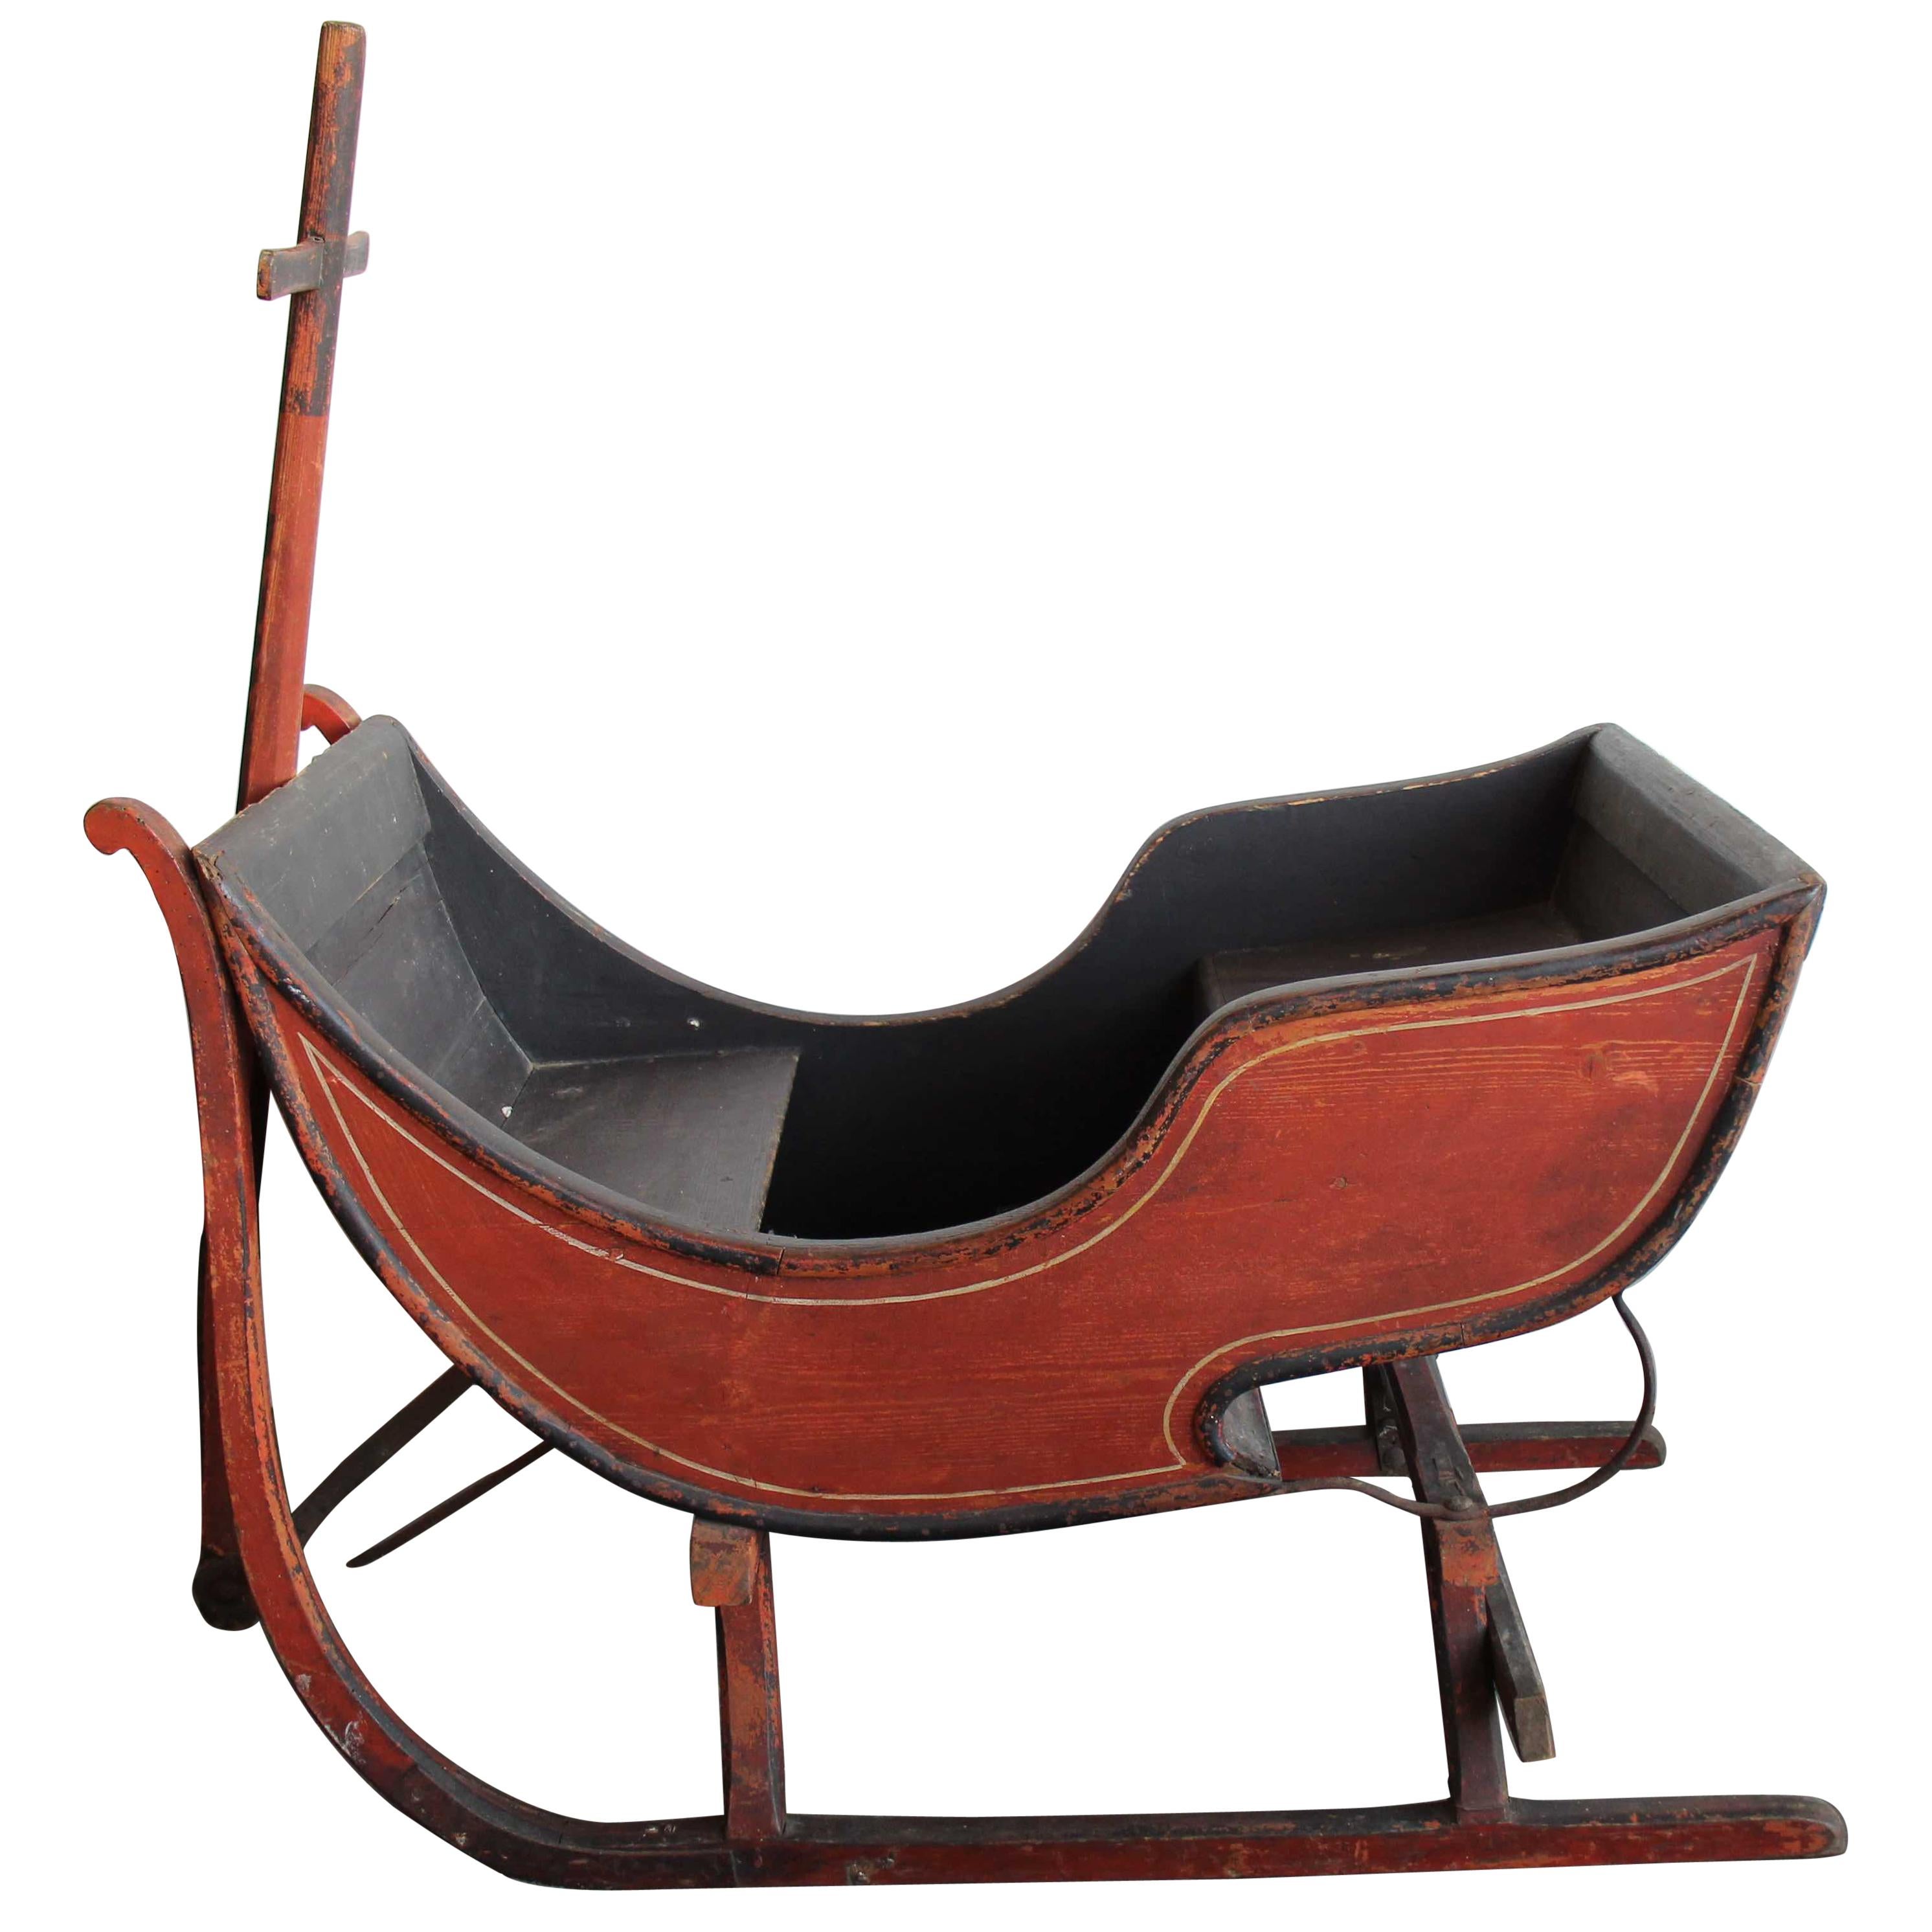 19th Century Antique Wooden Sledge from Germany